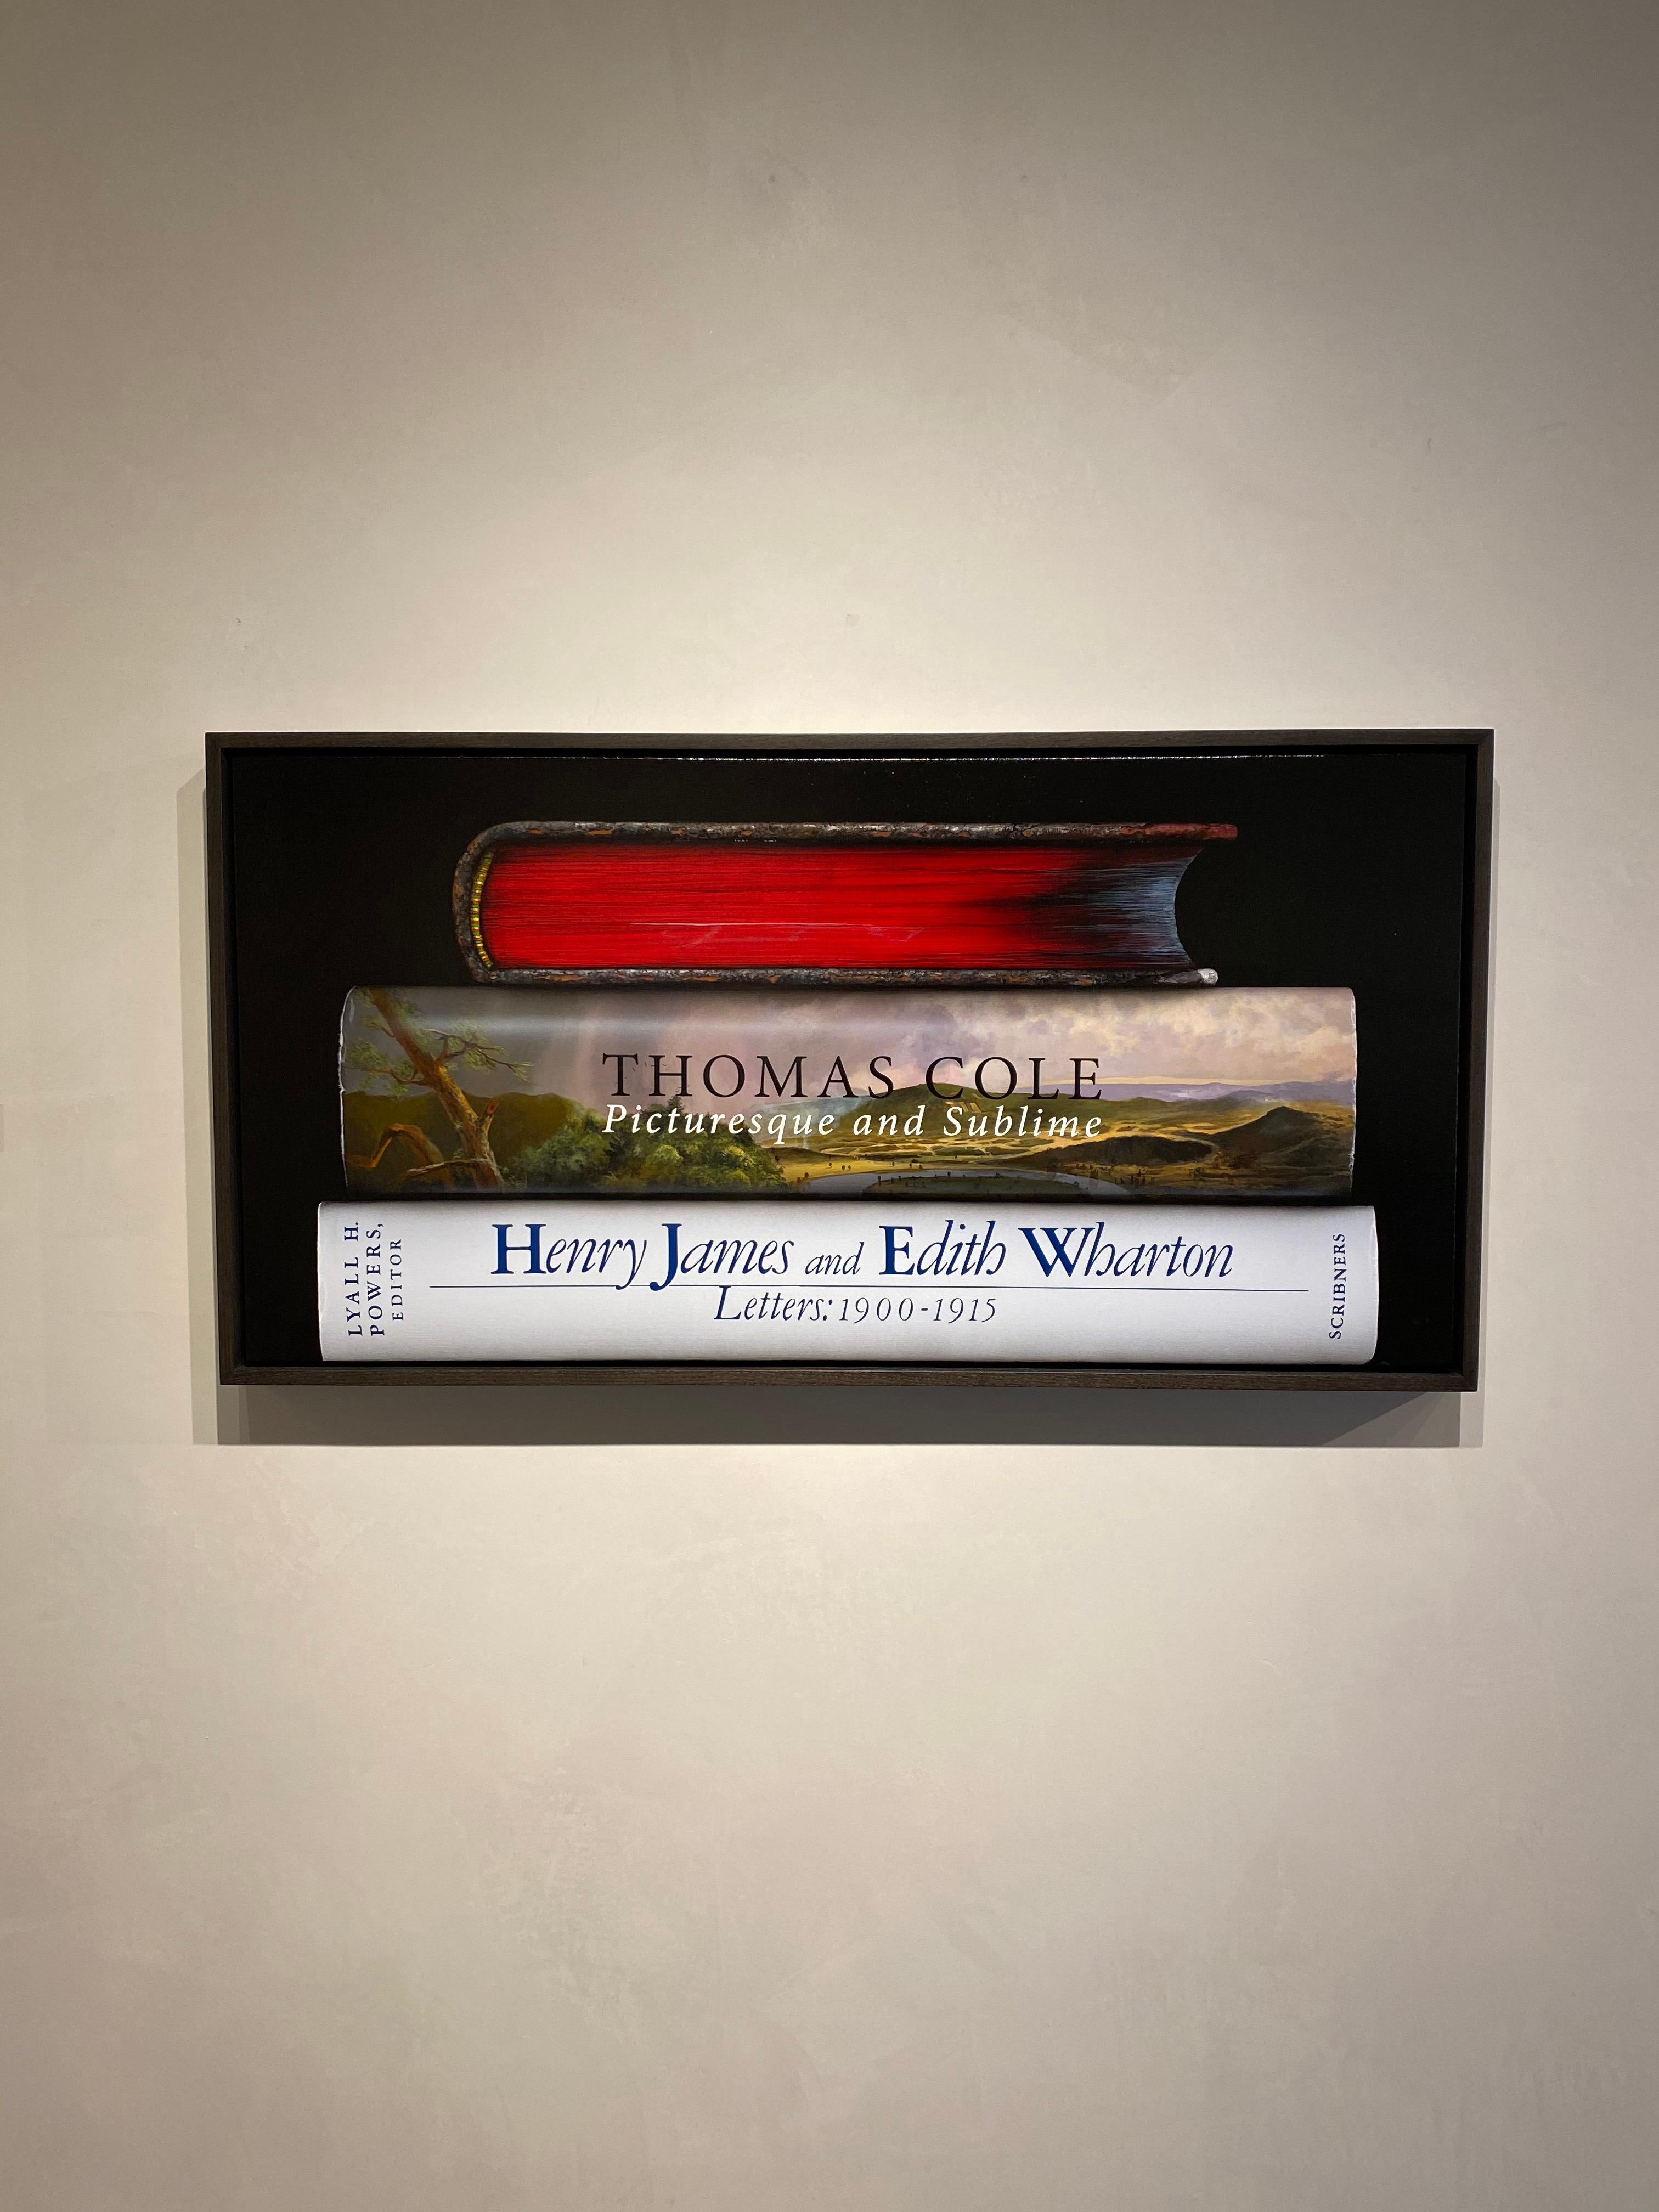 Vanitas 20.03.19 -hyper-realist, framed, acrylic painting featuring thomas cole - Black Interior Painting by Paul Béliveau